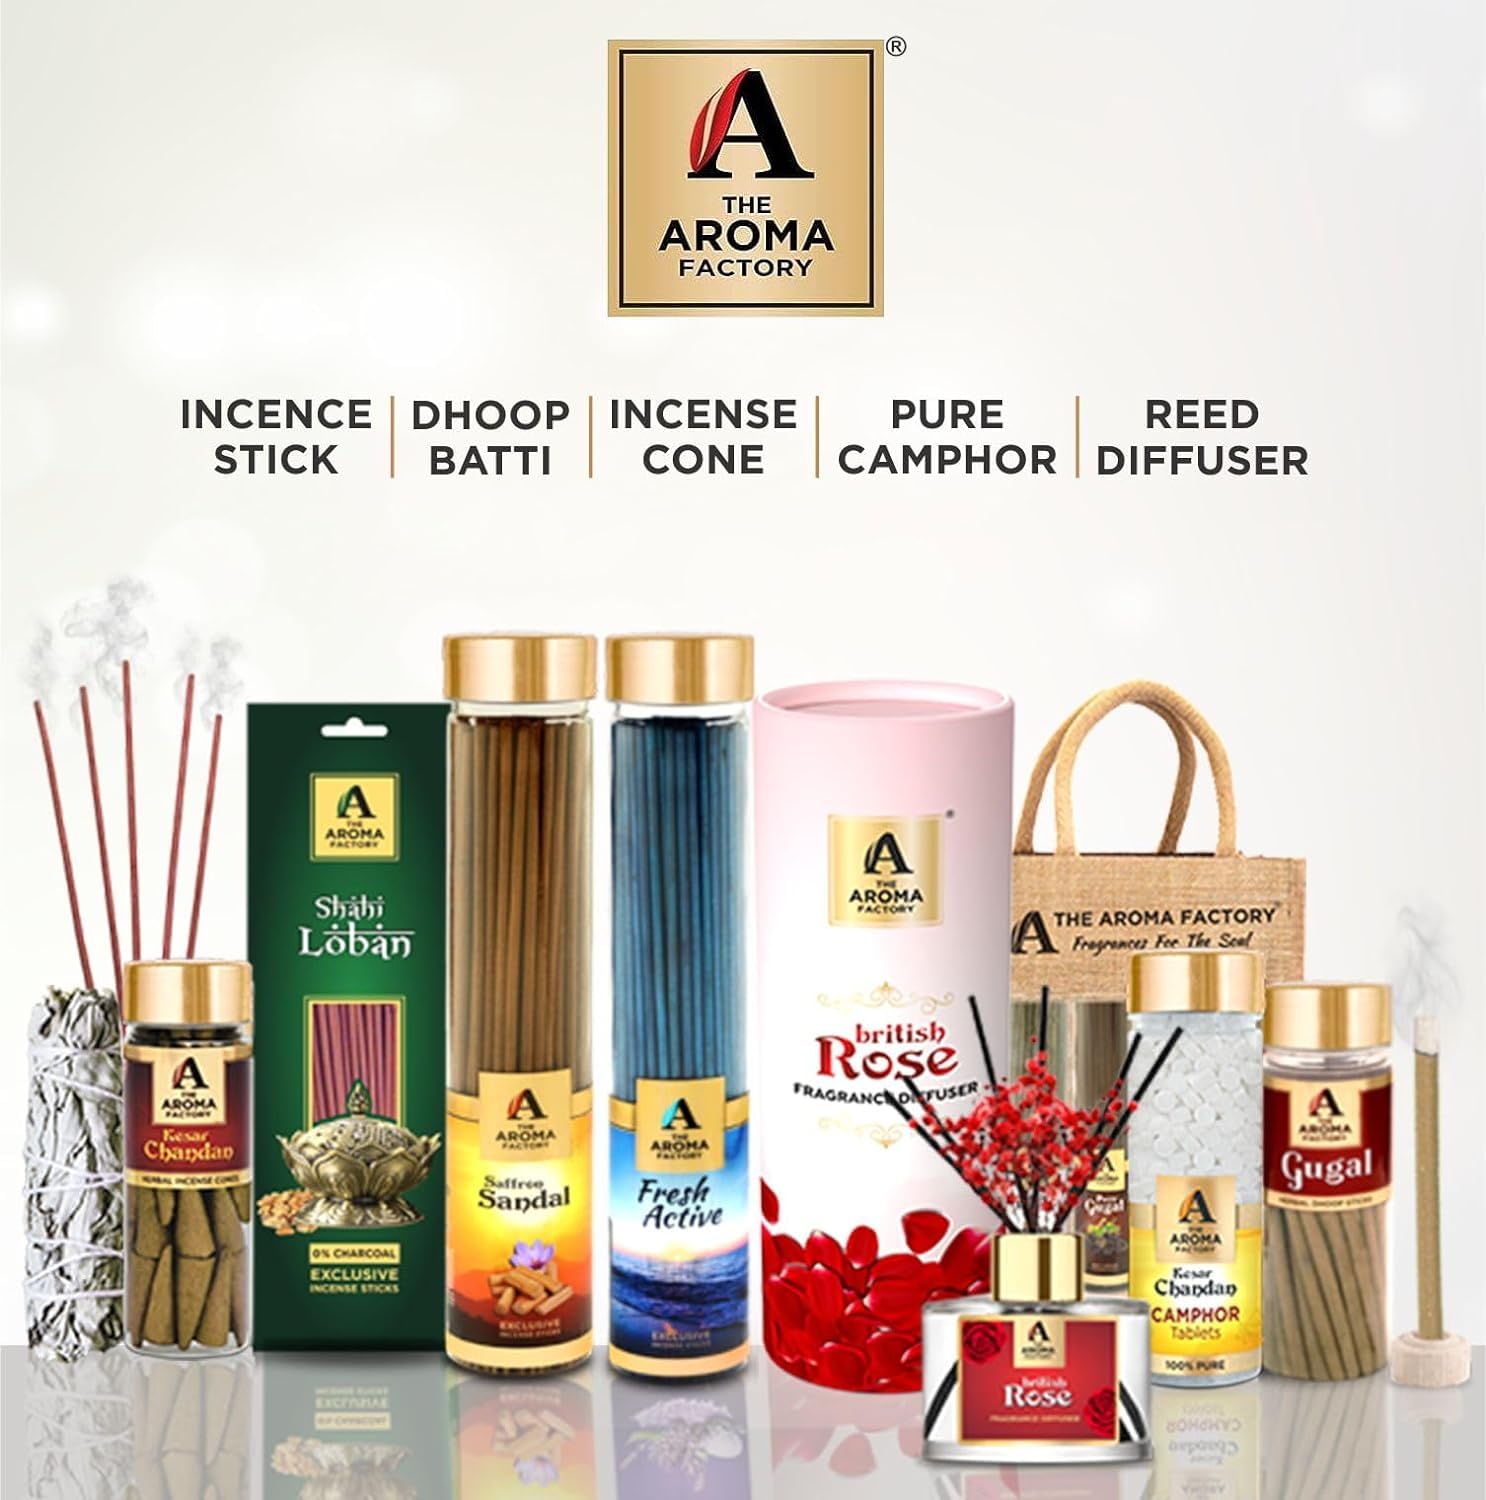 The Aroma Factory Happy Birthday Sister Gift with Card (25 Swad Candy, Fresh Active Agarbatti Bottle, Jasmine Cone) in Jute Bag